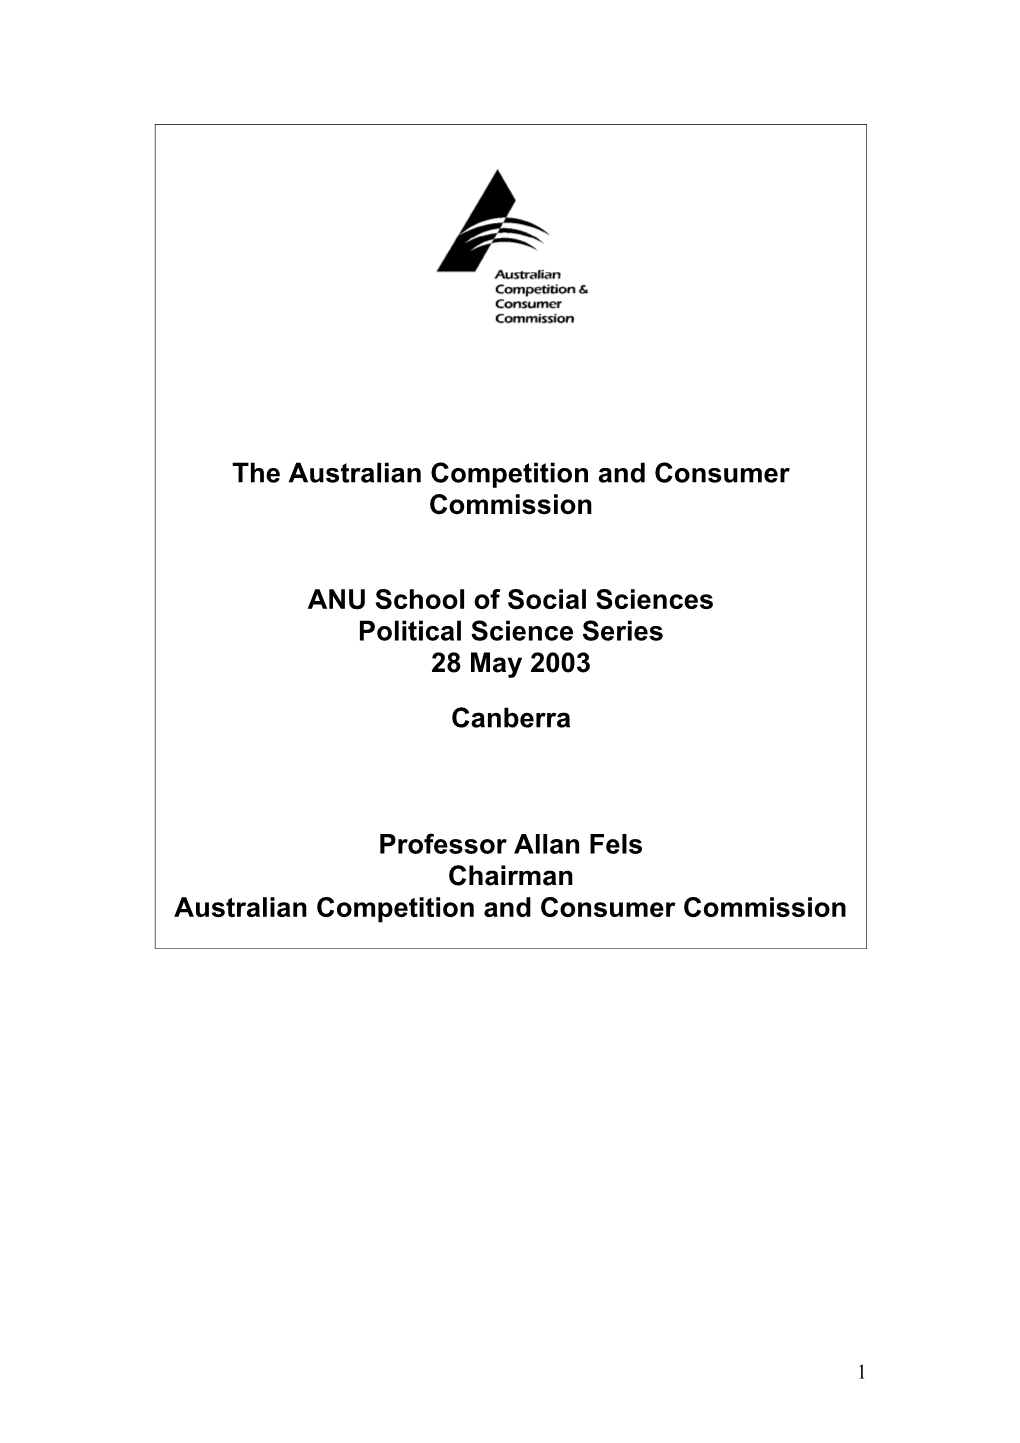 The Australian Competition and Consumer Commission